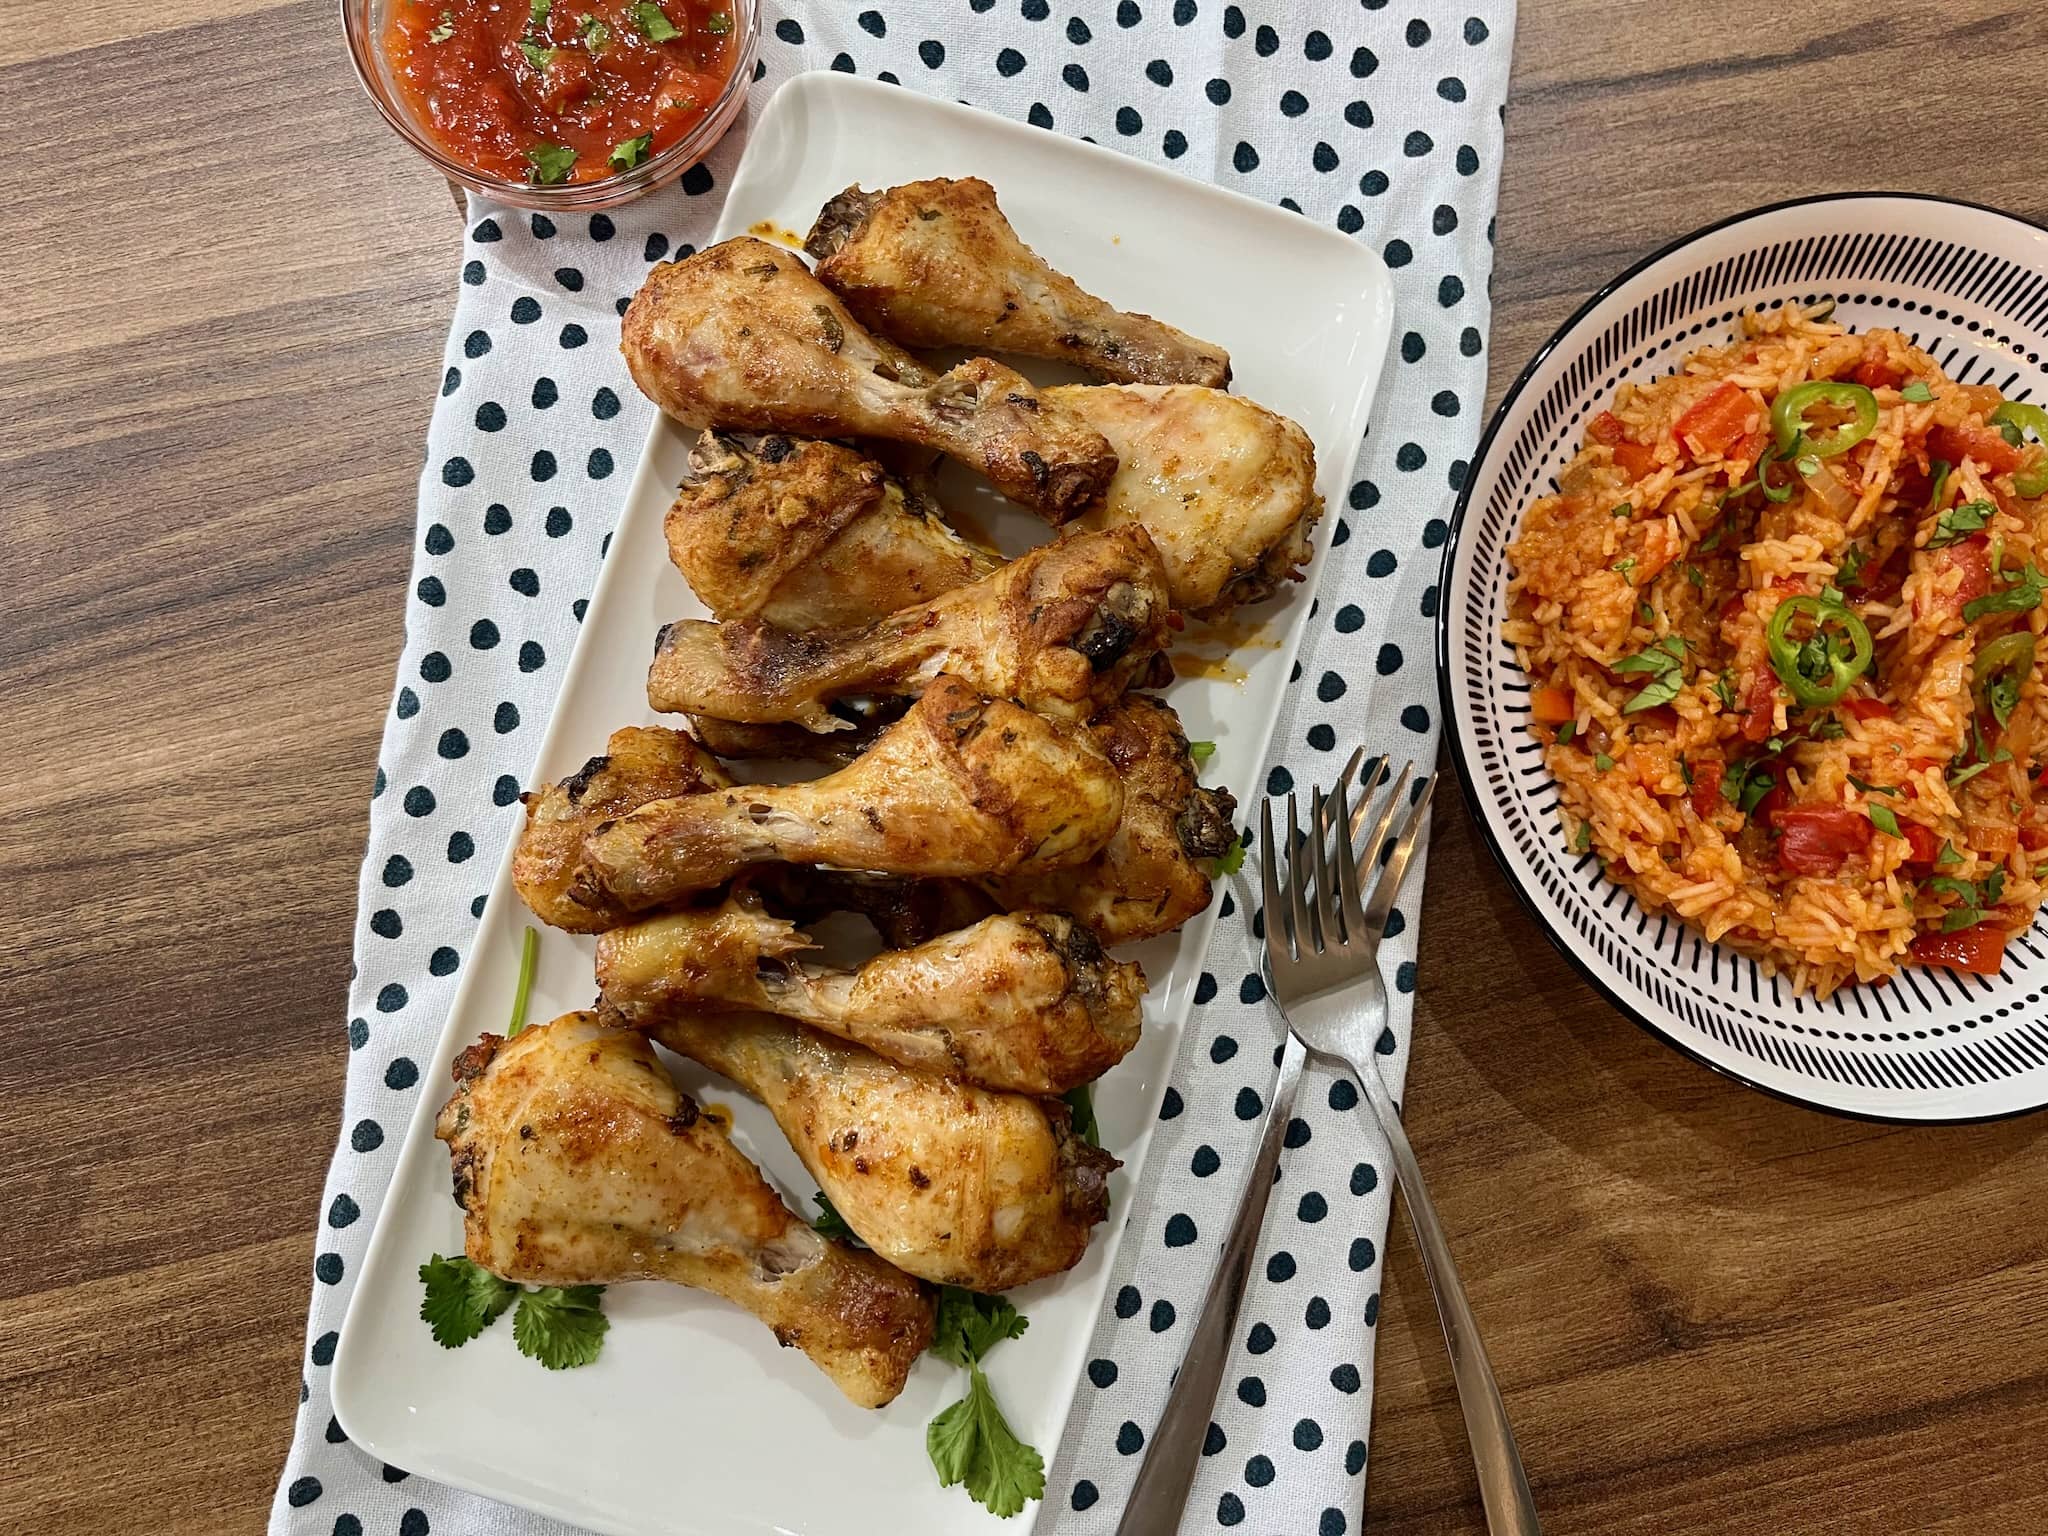 Nicely baked Mexican-style chicken drumsticks on a plater